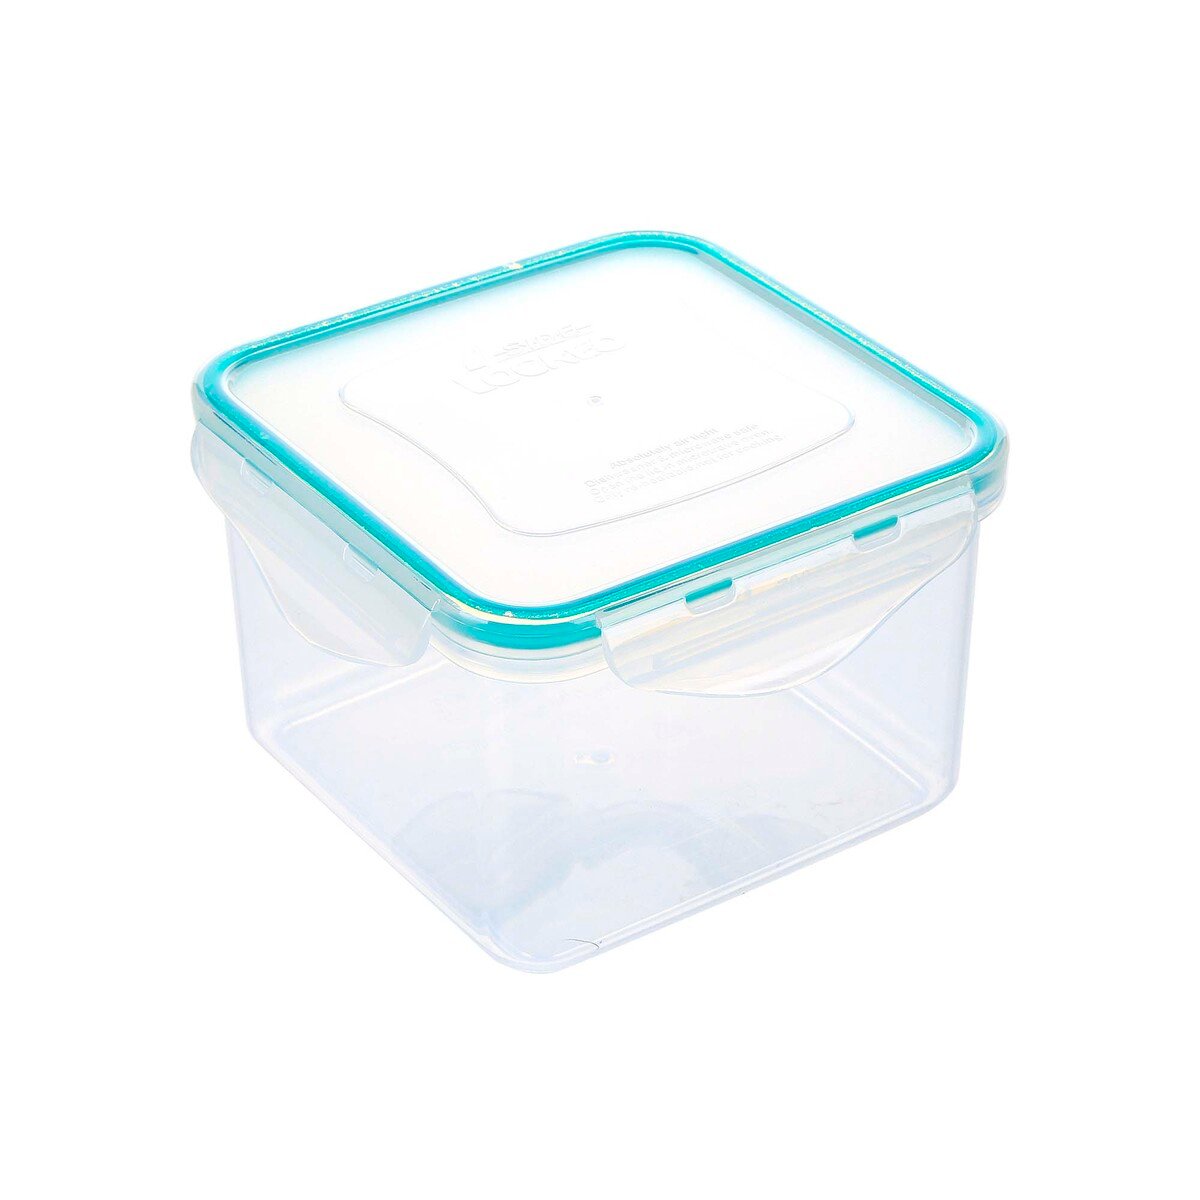 4 Side Locked Container, Transparent, ZP023